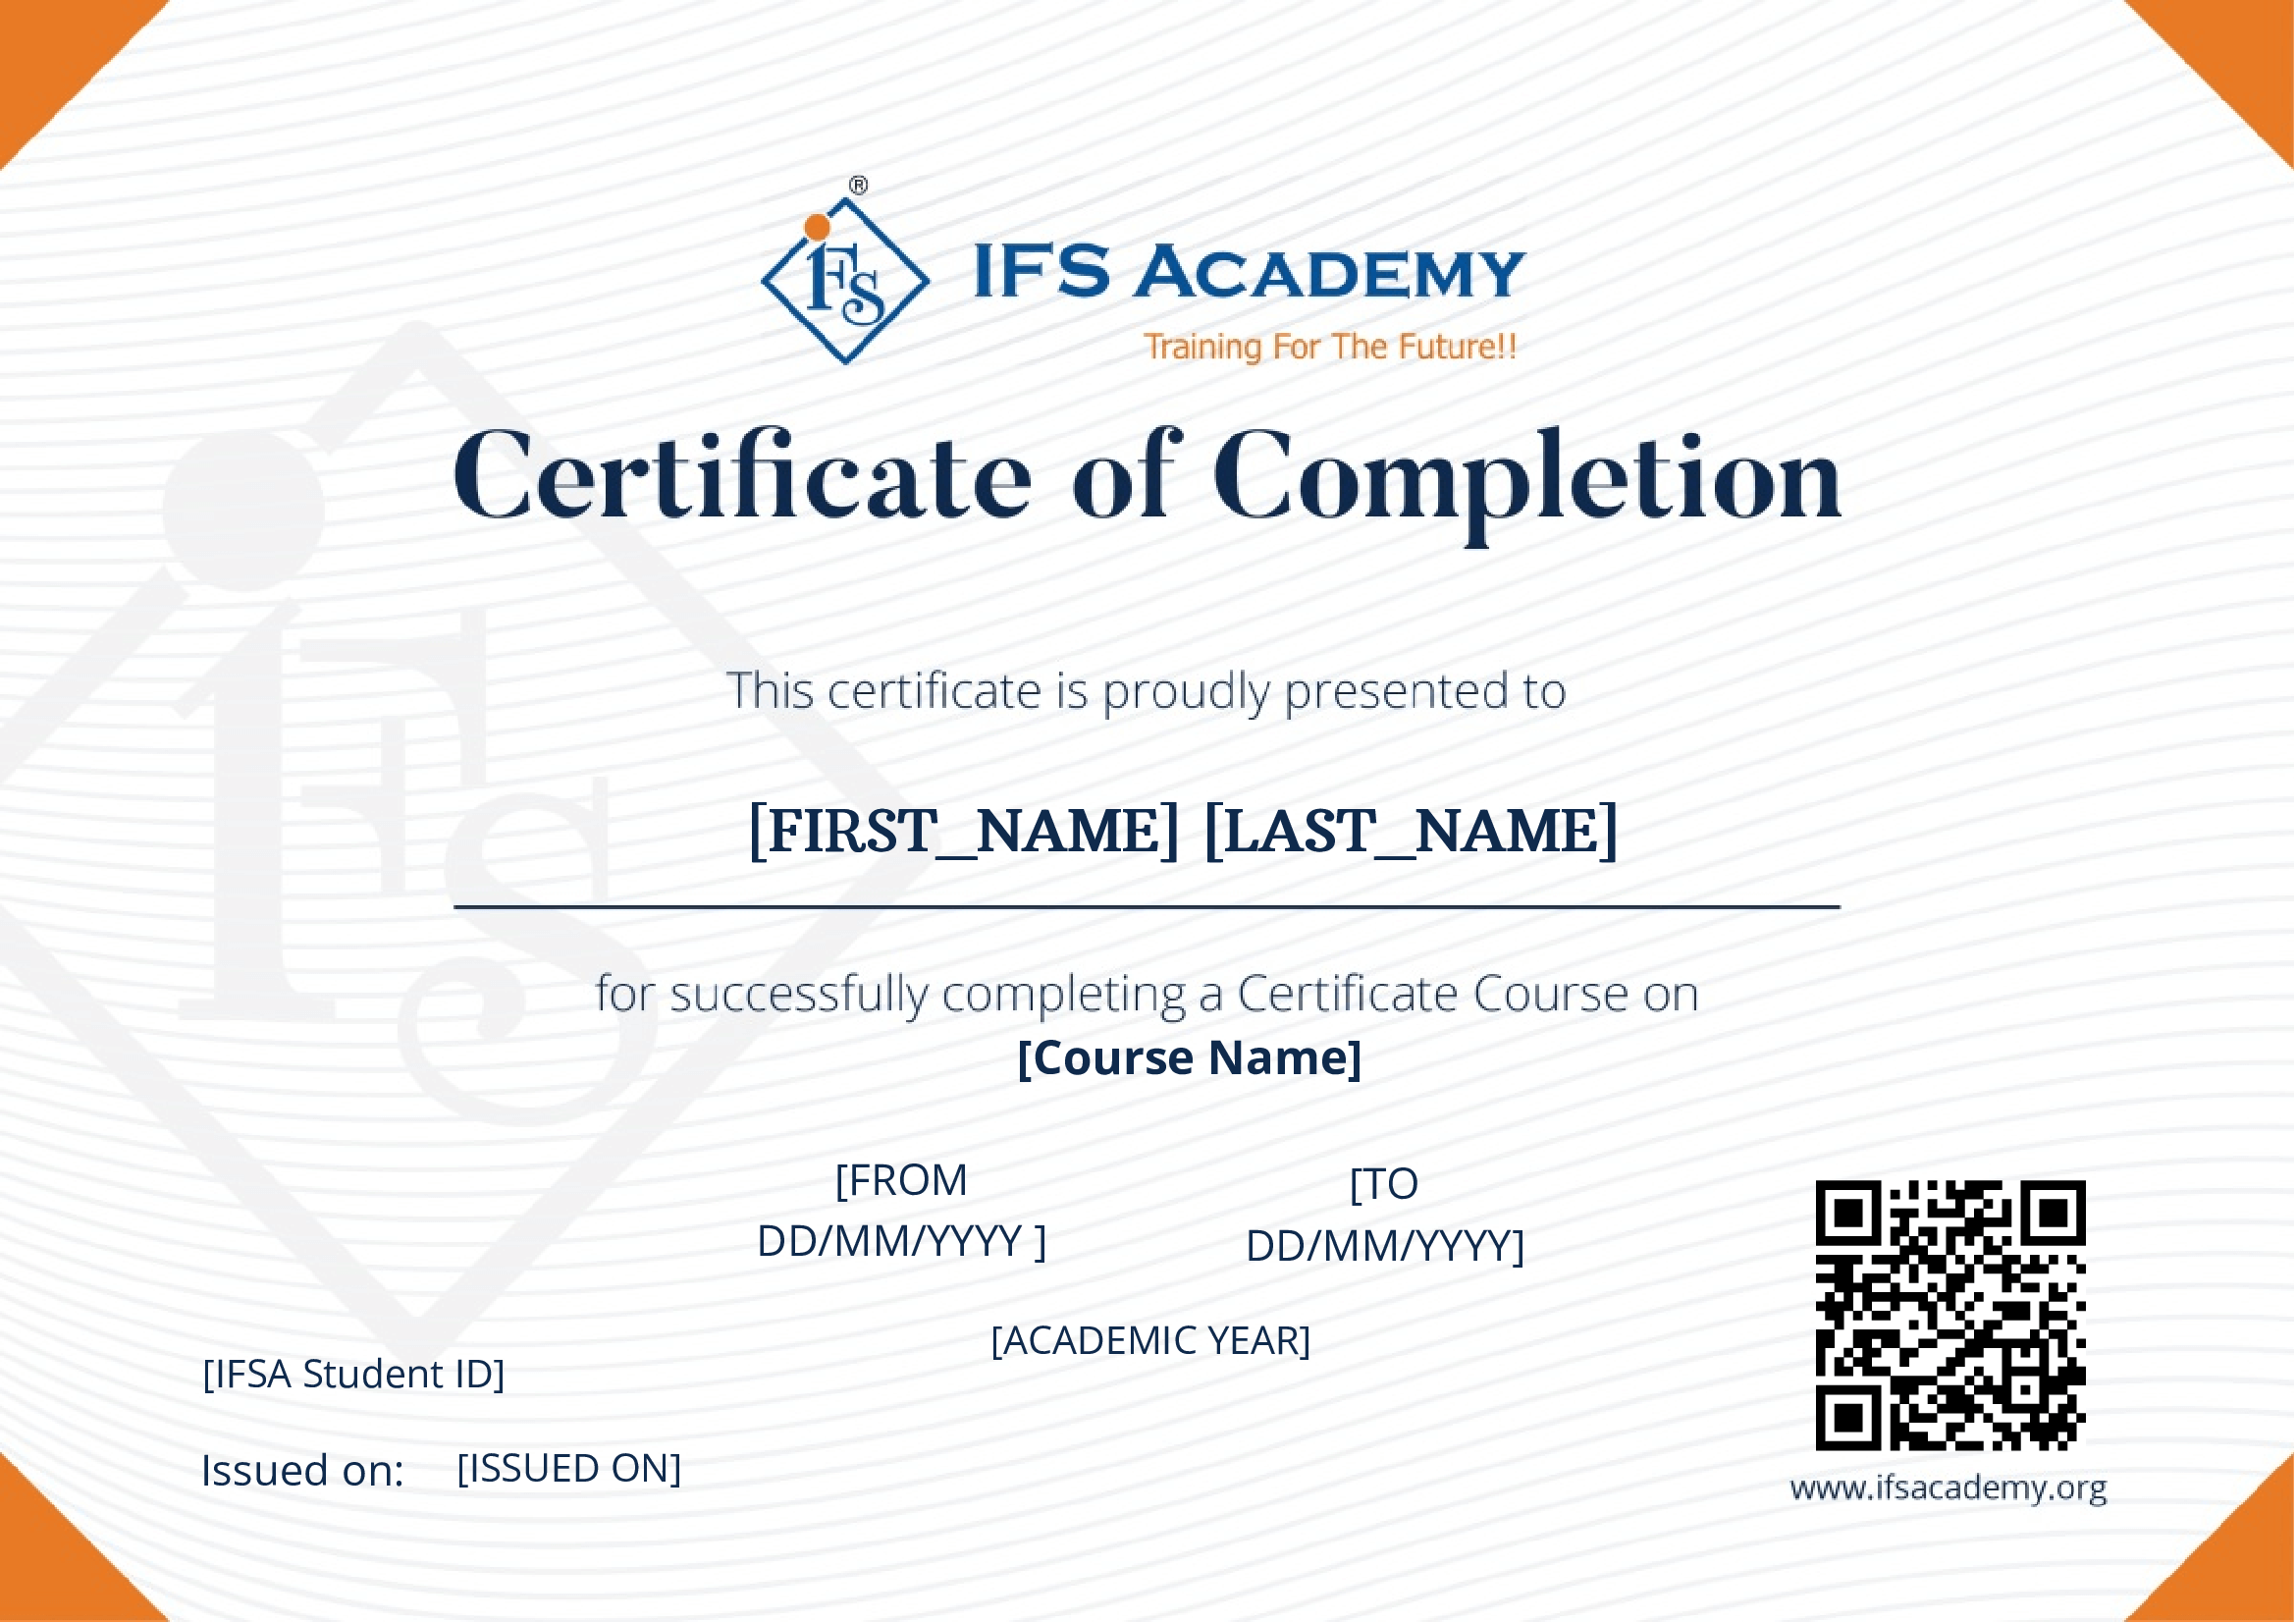 IFS Academy Certificate of Completion